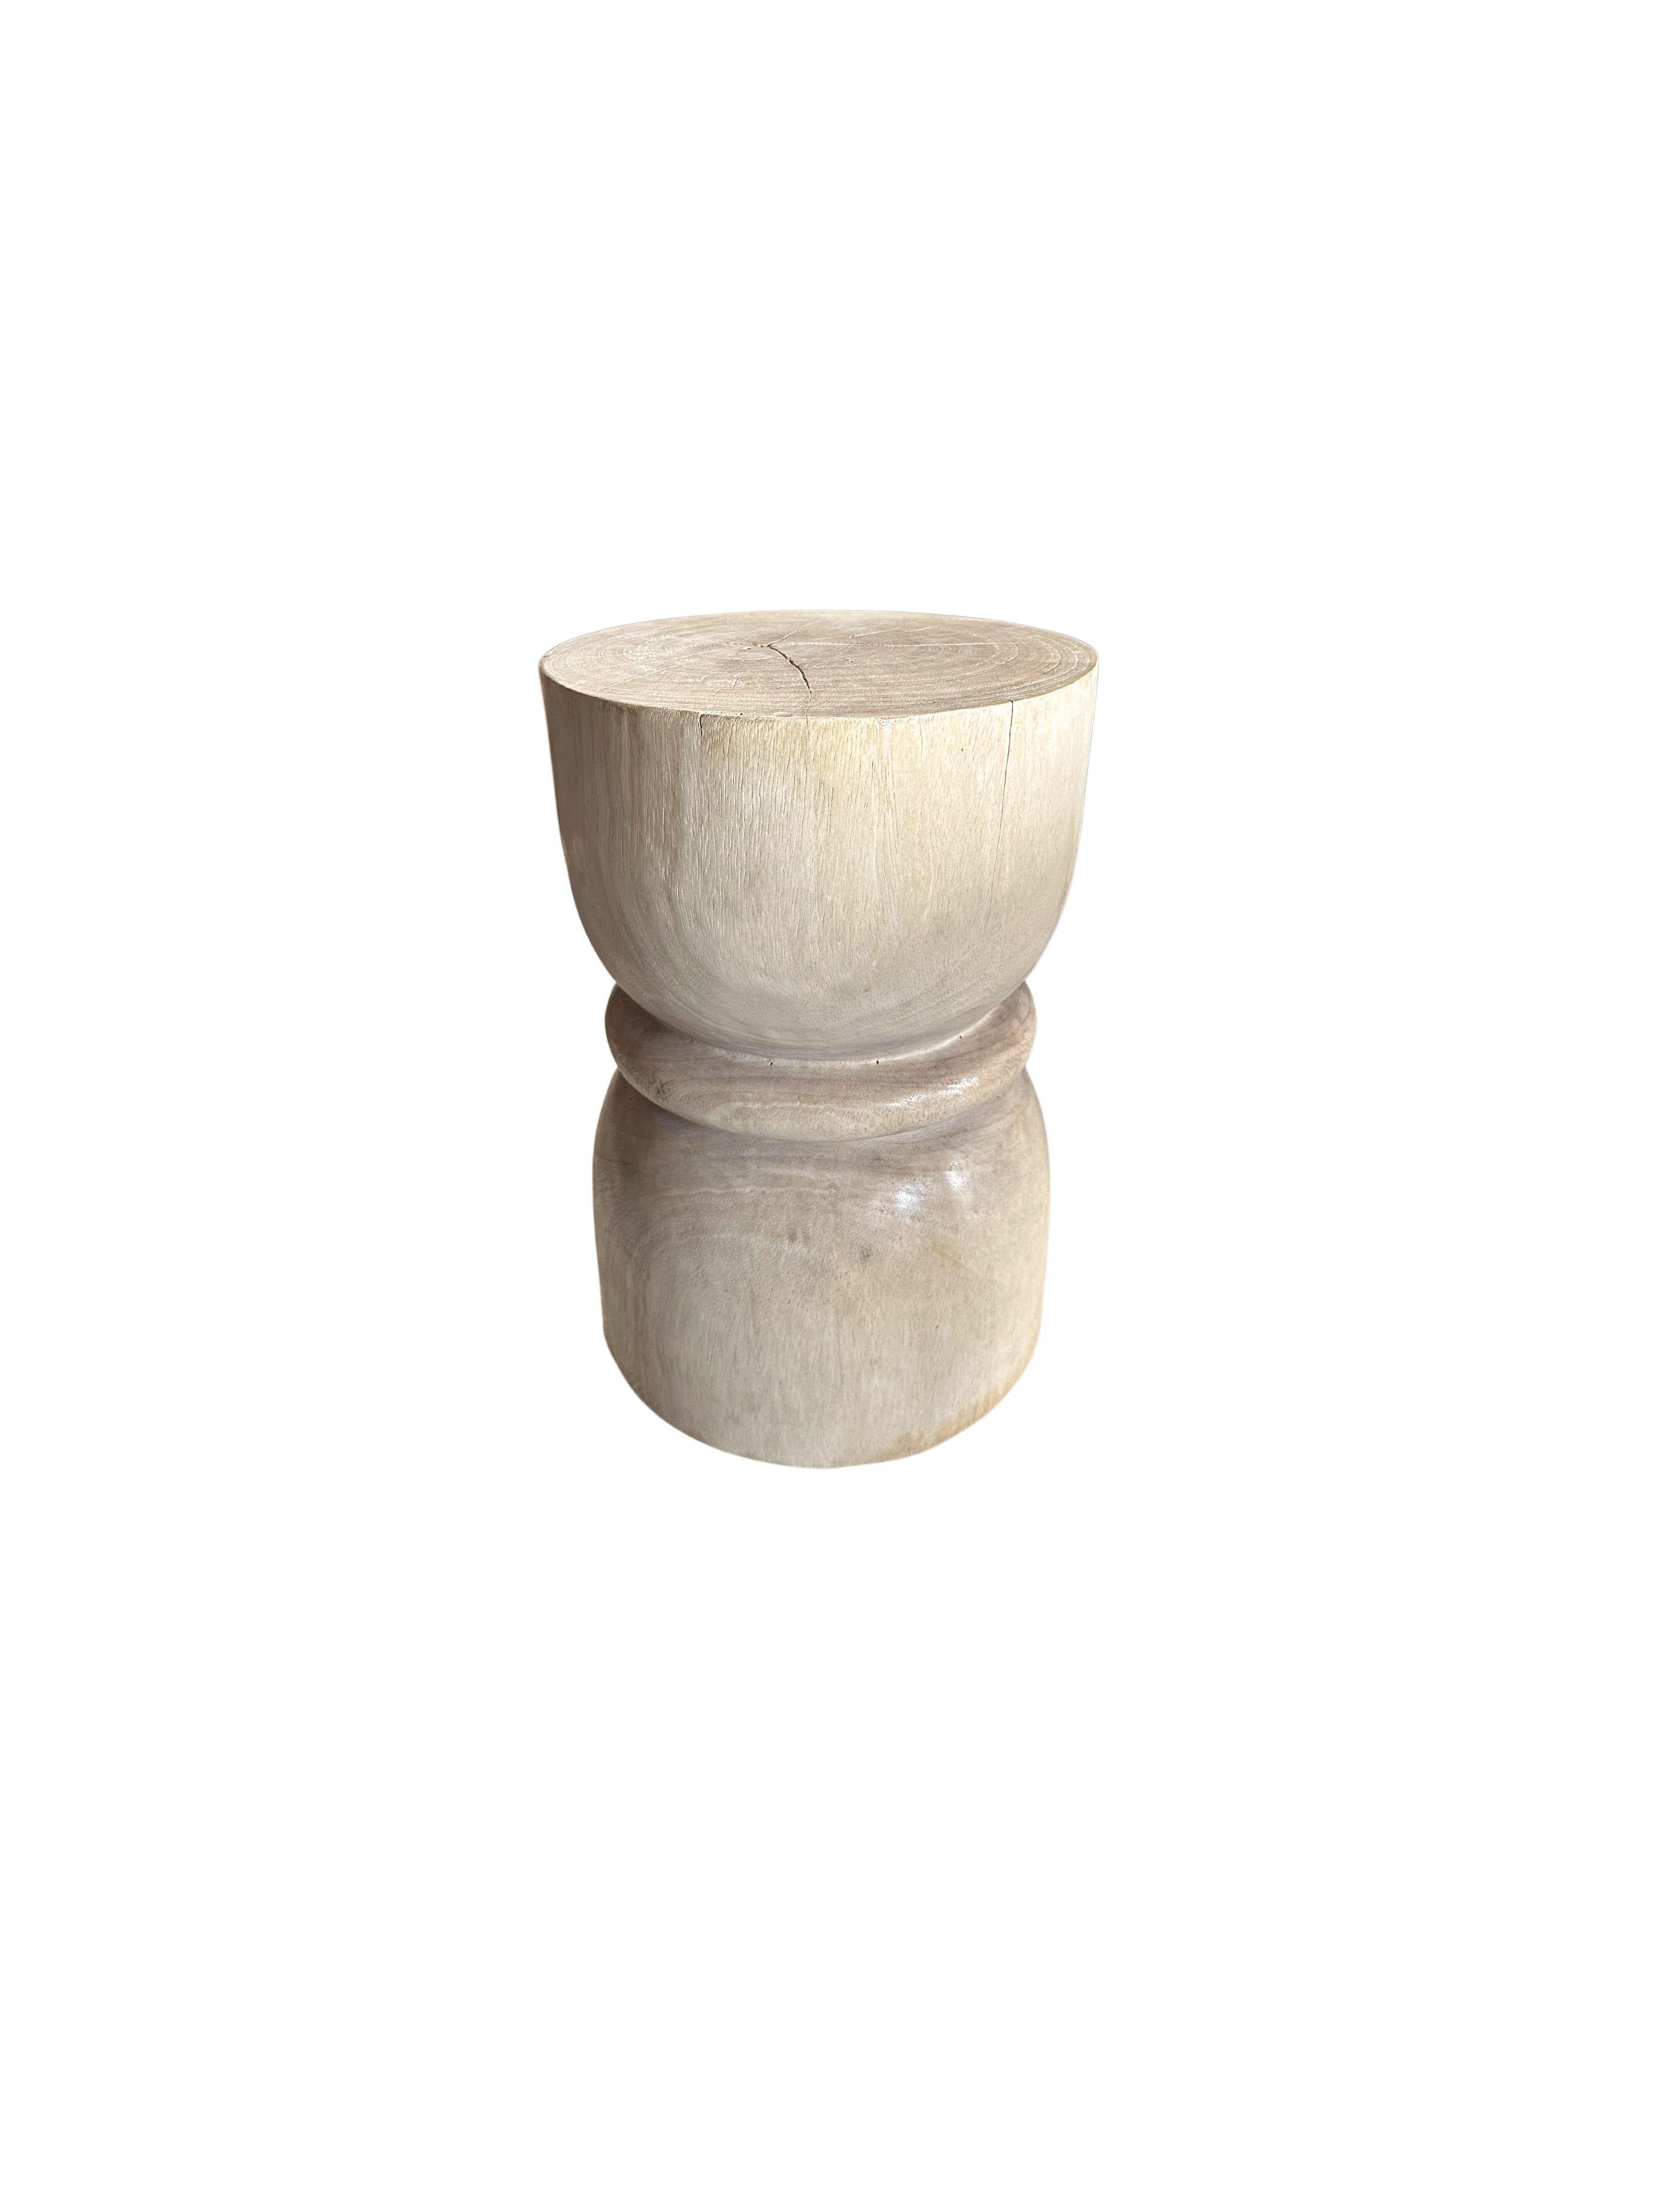 A wonderfully sculptural side table crafted from solid mango wood. It features a natural finish where the exterior was sanded and smoothed. The table features a wonderful mix of wood textures and shades. To achieve its tones the wood was bleached